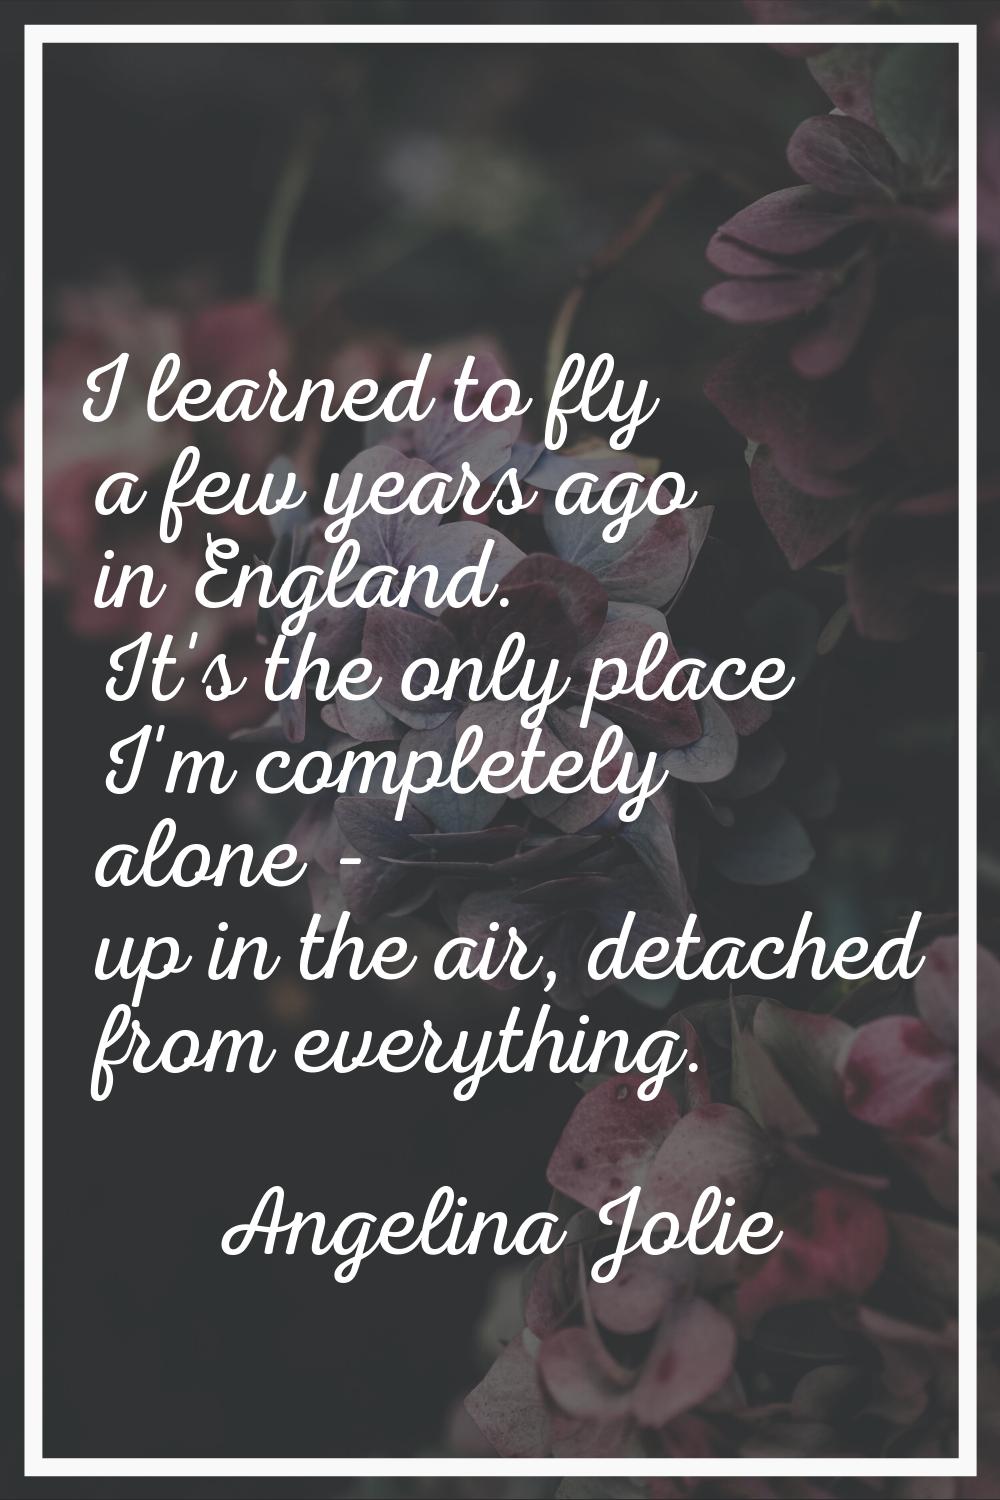 I learned to fly a few years ago in England. It's the only place I'm completely alone - up in the a